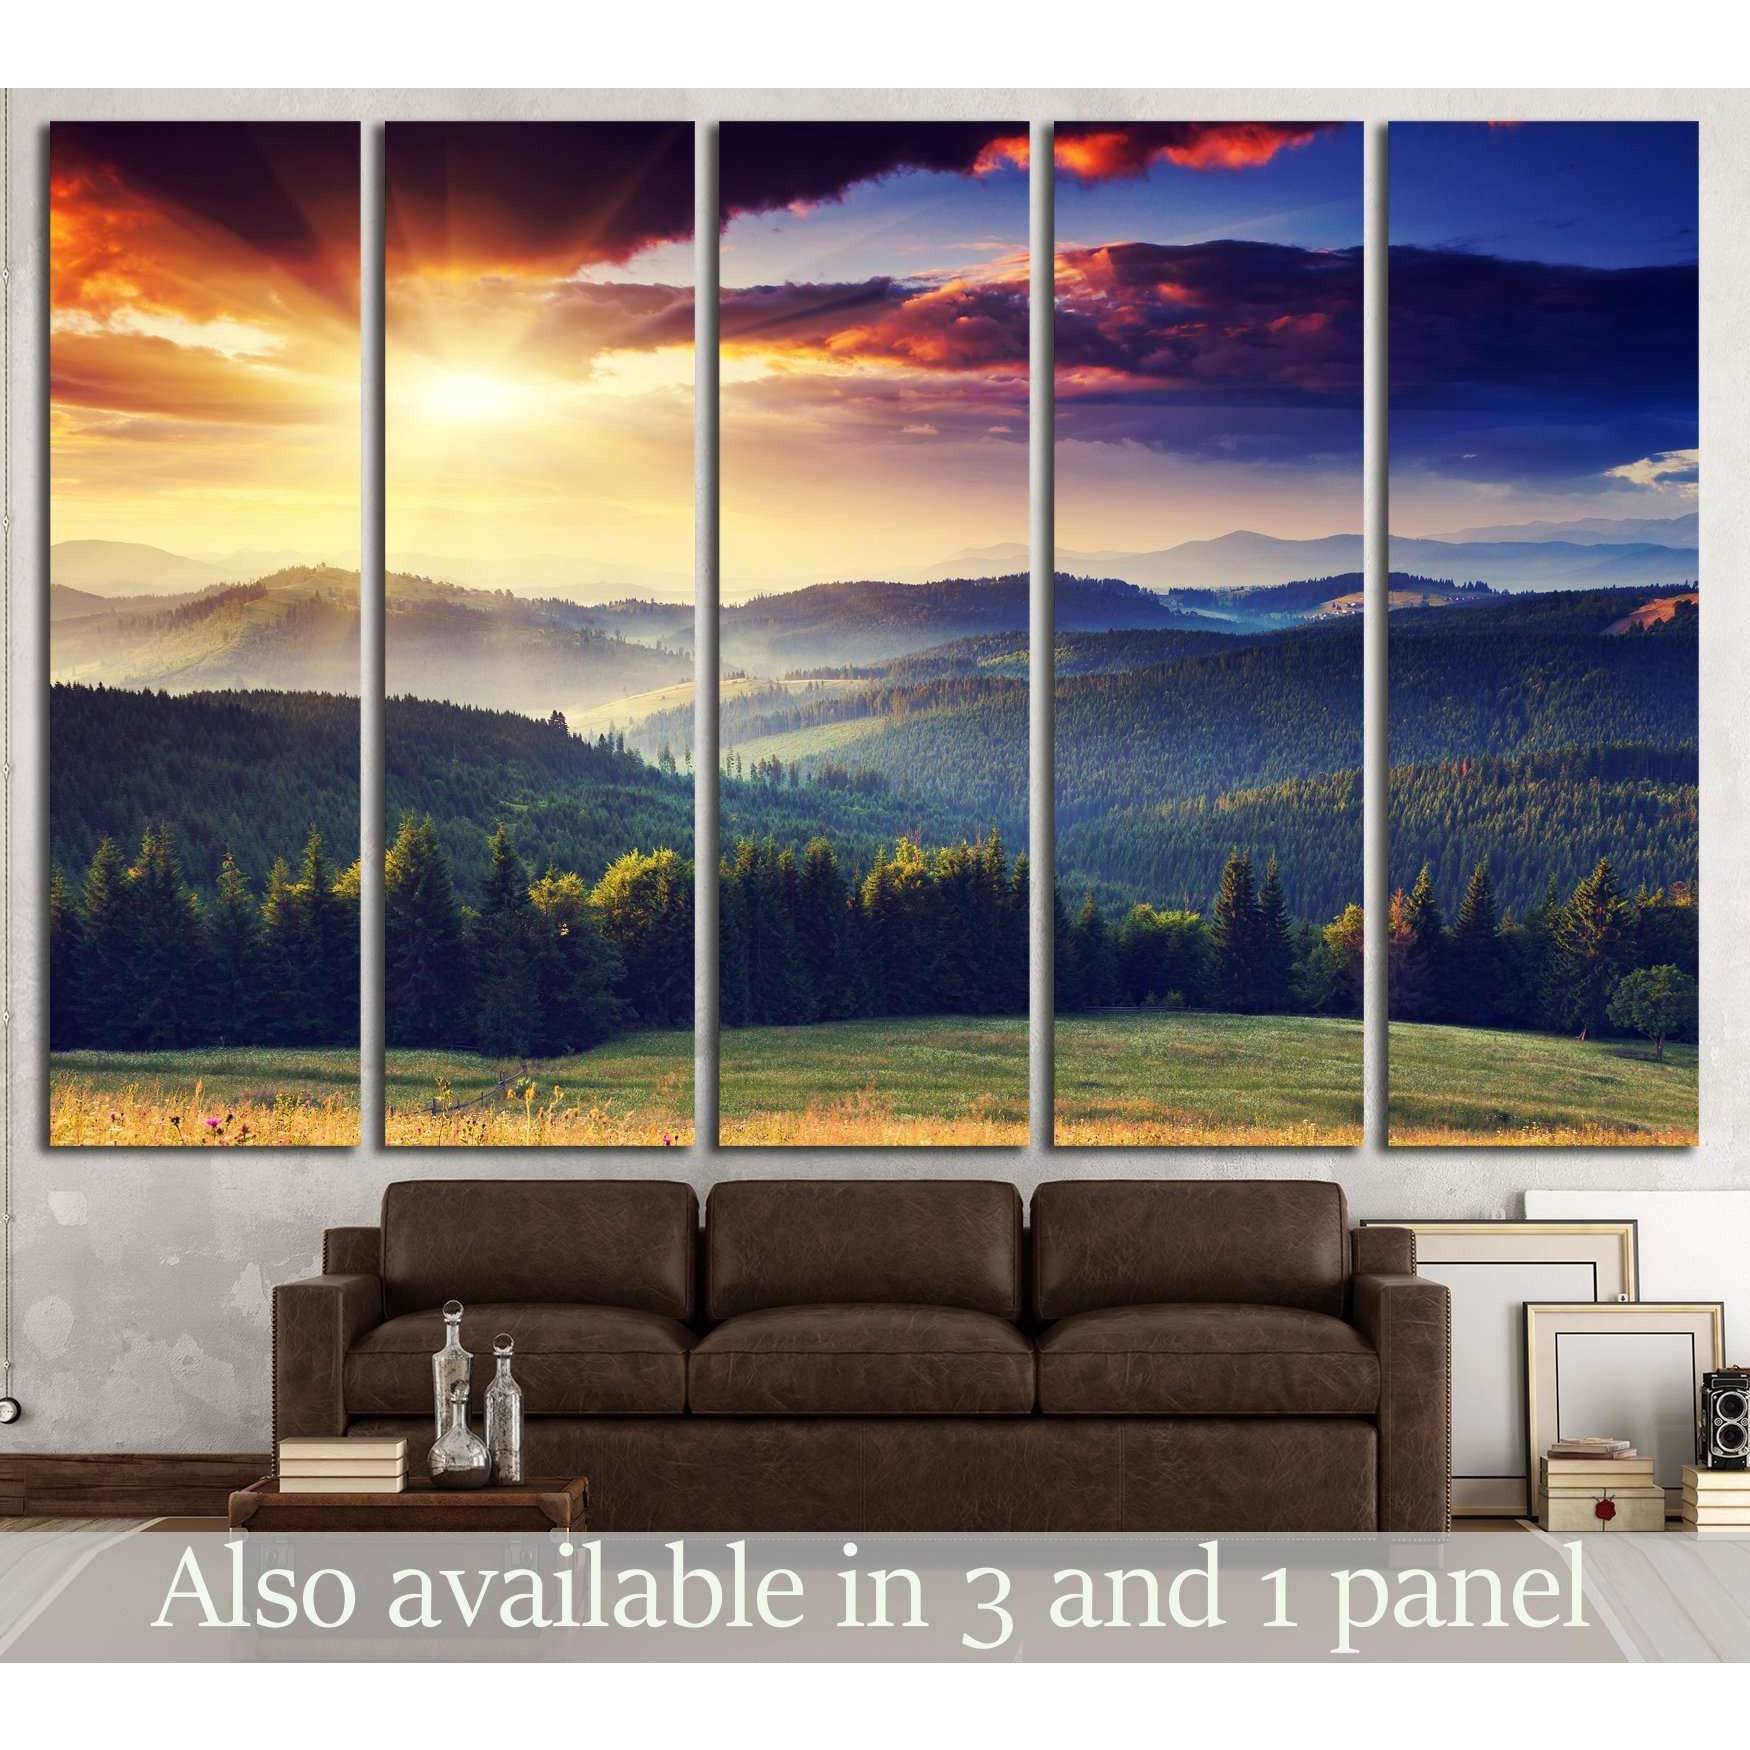 Sunrise Mountain Range Multi-Panel Canvas for Expansive Wall DecorThis multi-panel canvas print presents a breathtaking sunrise over a lush mountain range, segmented into a striking display that spans across each panel to create a continuous and expansive